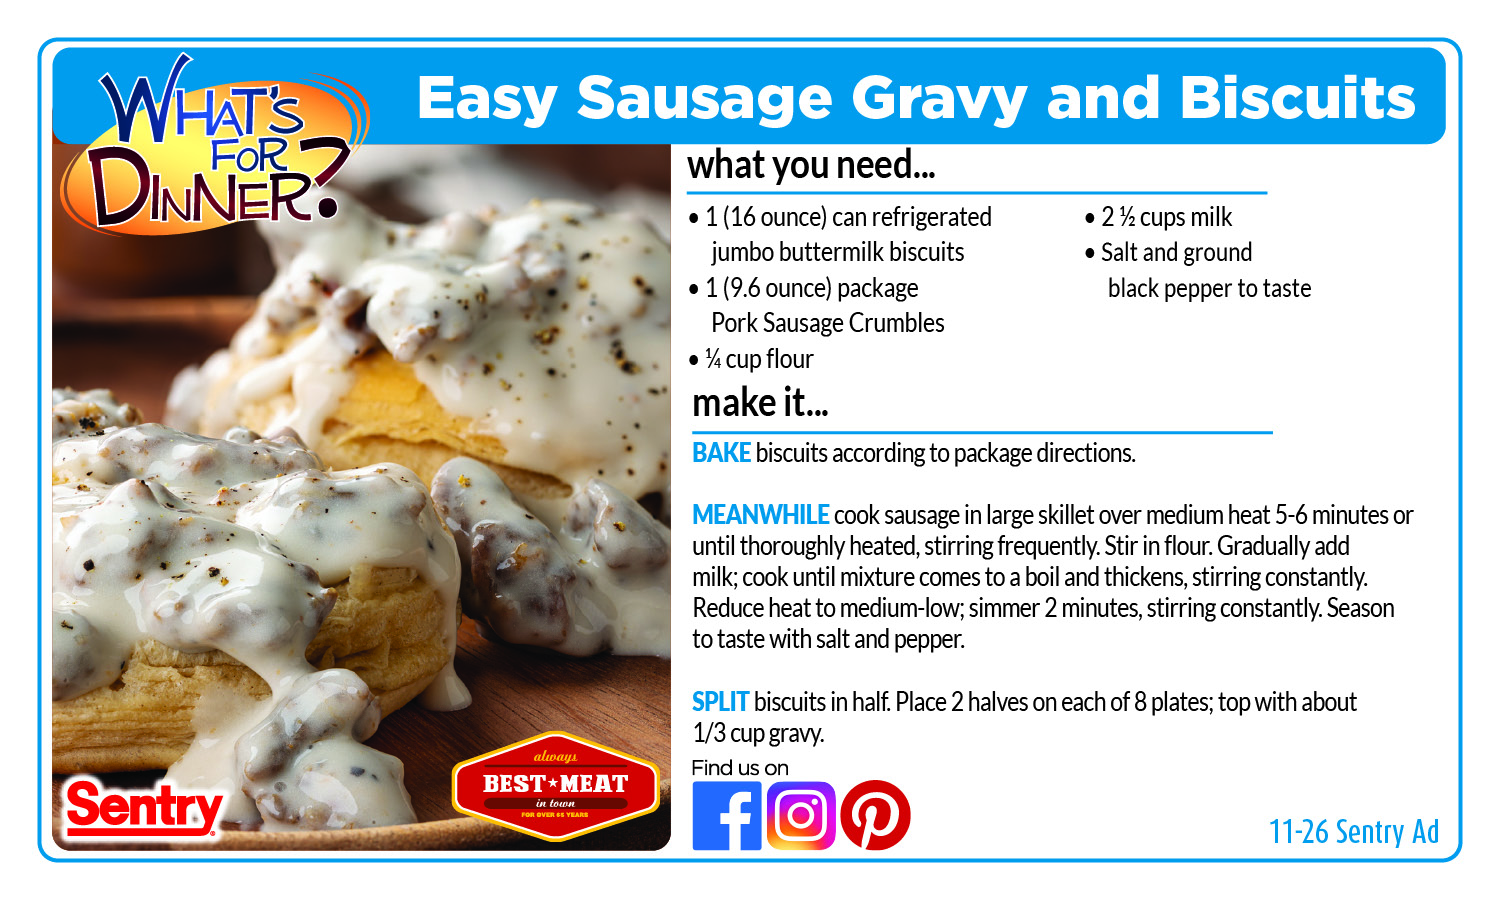 Recipe: Sausage Gravy and Biscuits